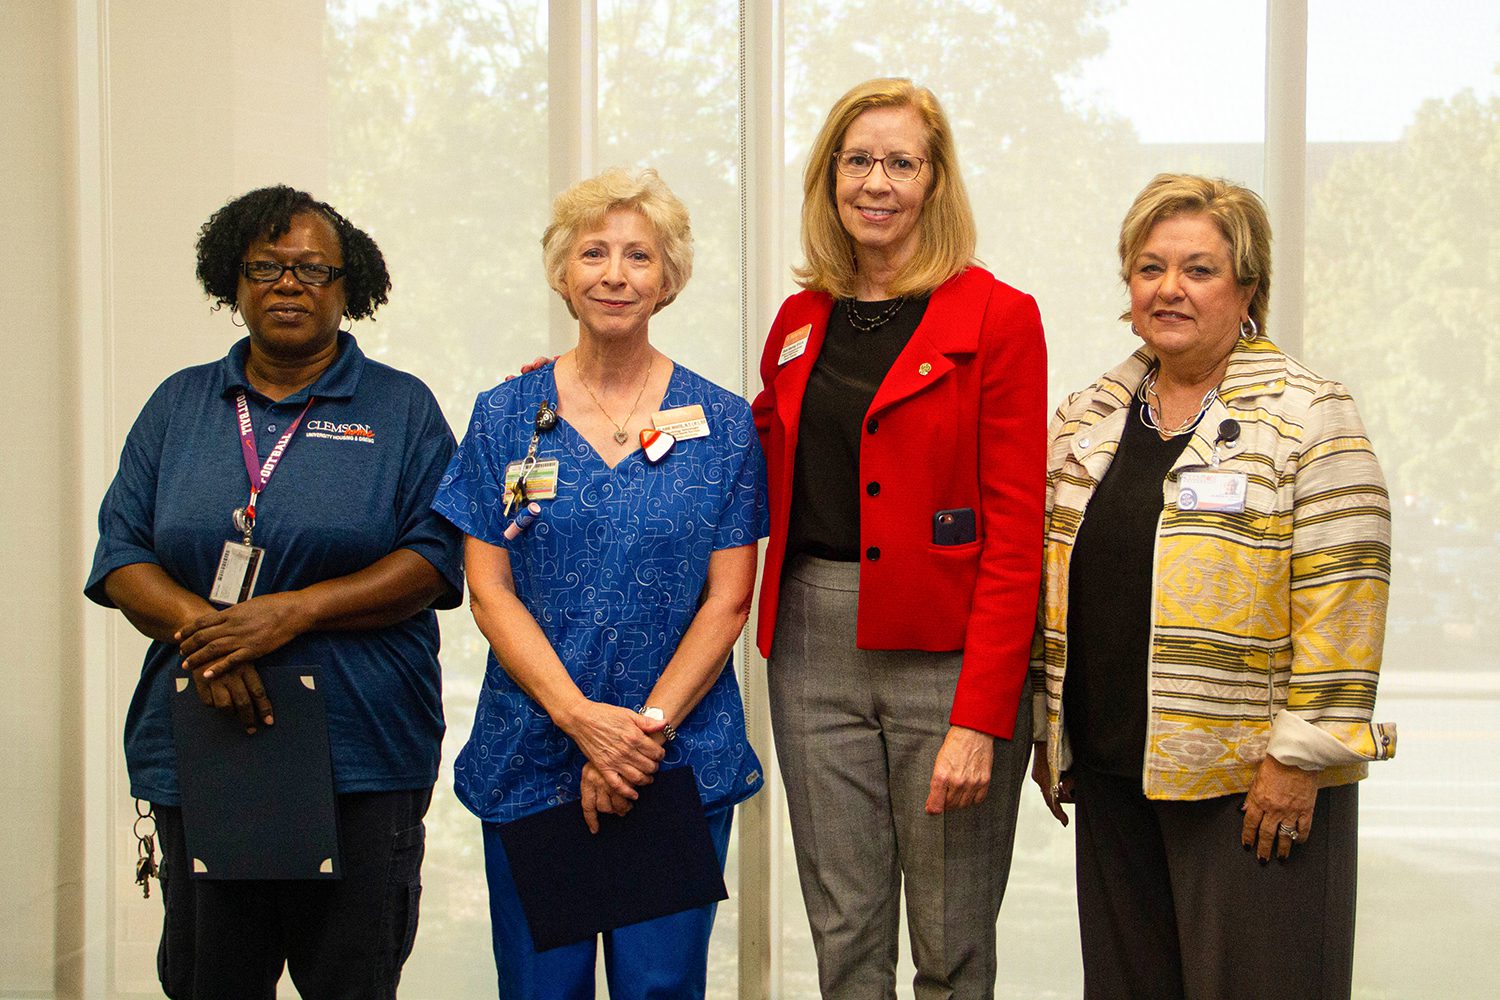 (Left to right) Teresa Estrich, Elaine White and Dede Kearney joined Vice President Almeda Jacks to receive pins and certificates in honor of many years of service to Student Affairs.